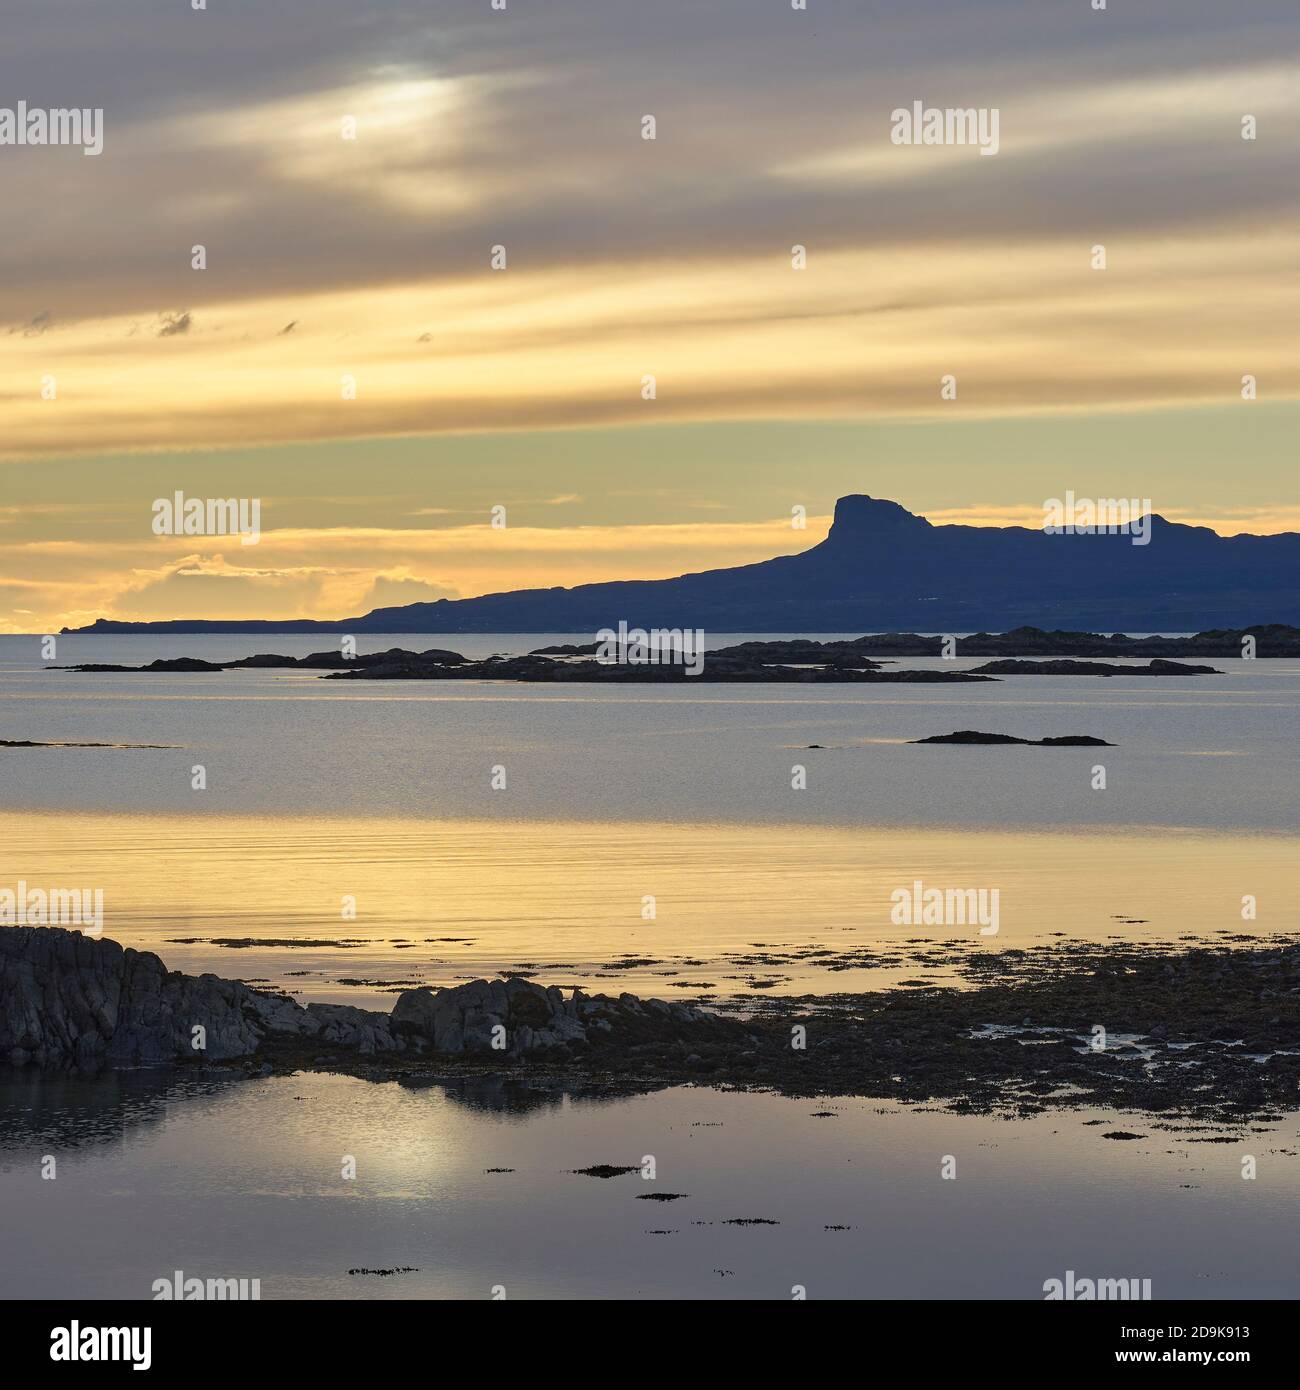 Sunset over the Isle of Eigg in the Small Isles, viewed from the Rhu Peninsula, Arisaig, Lochaber, Highland, Scotland. Stock Photo